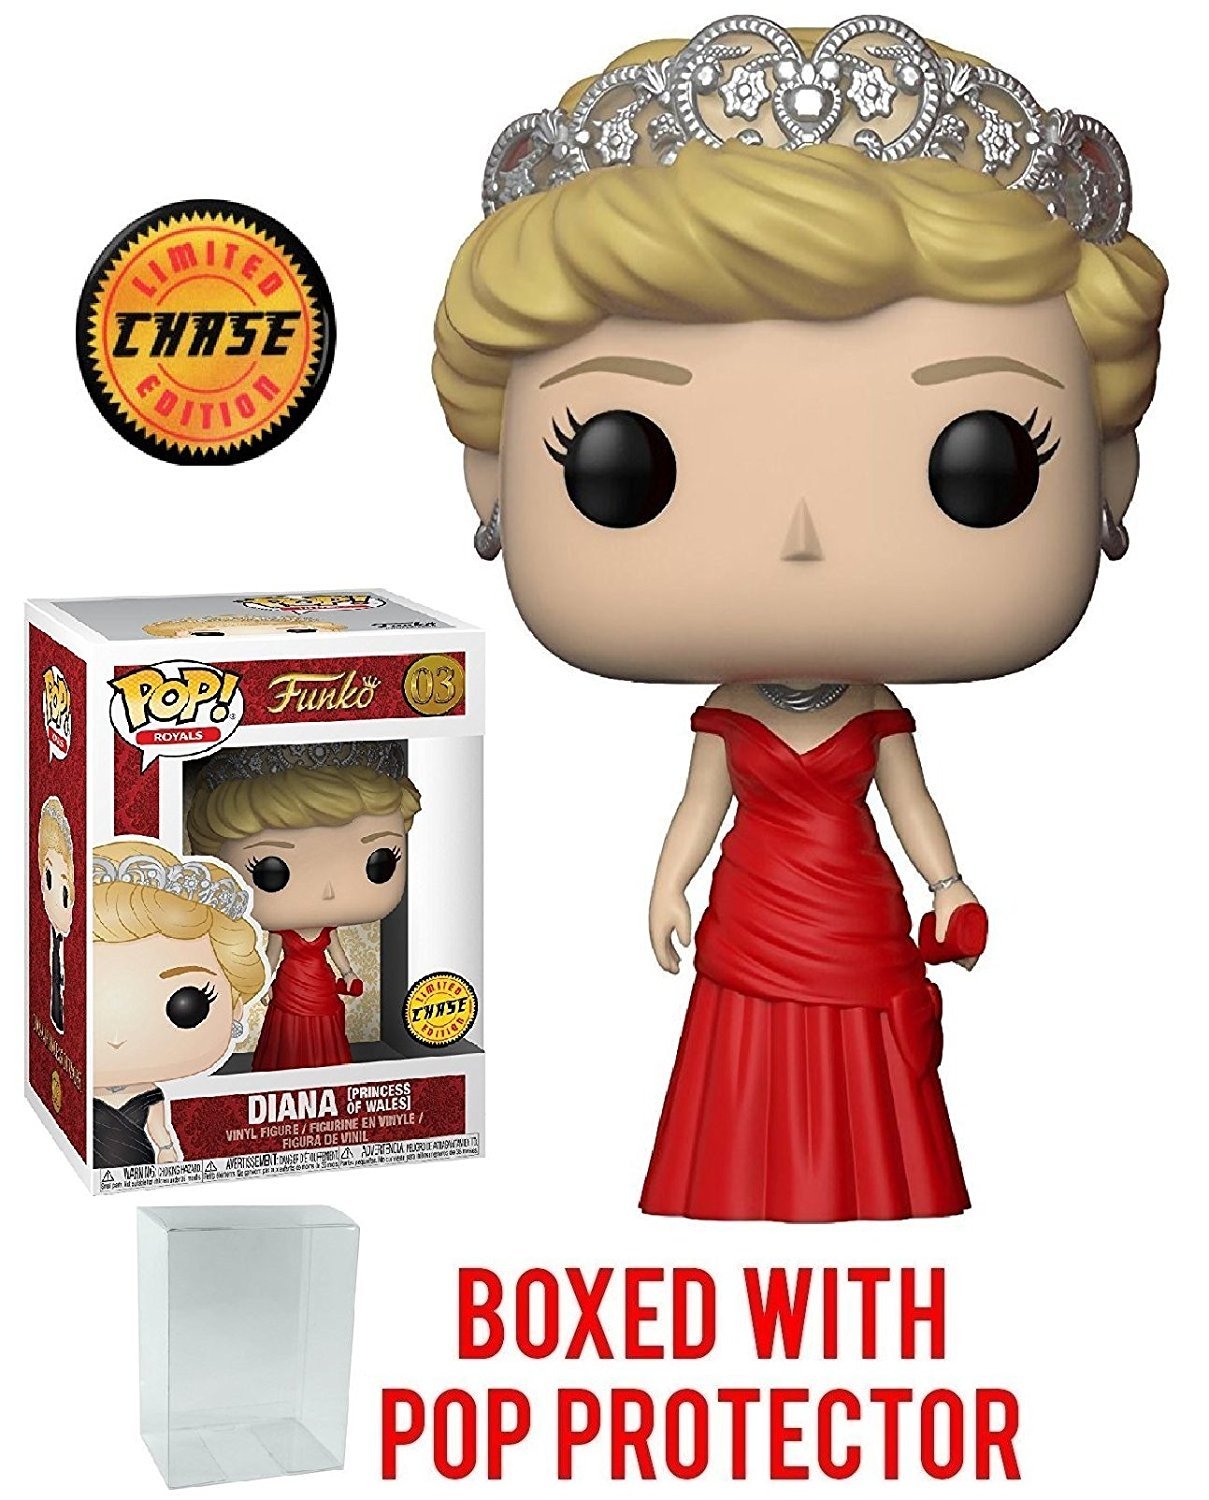 Funko POP!: Royal Family - Princess Diana styles may vary Collectible Figure - image 1 of 7